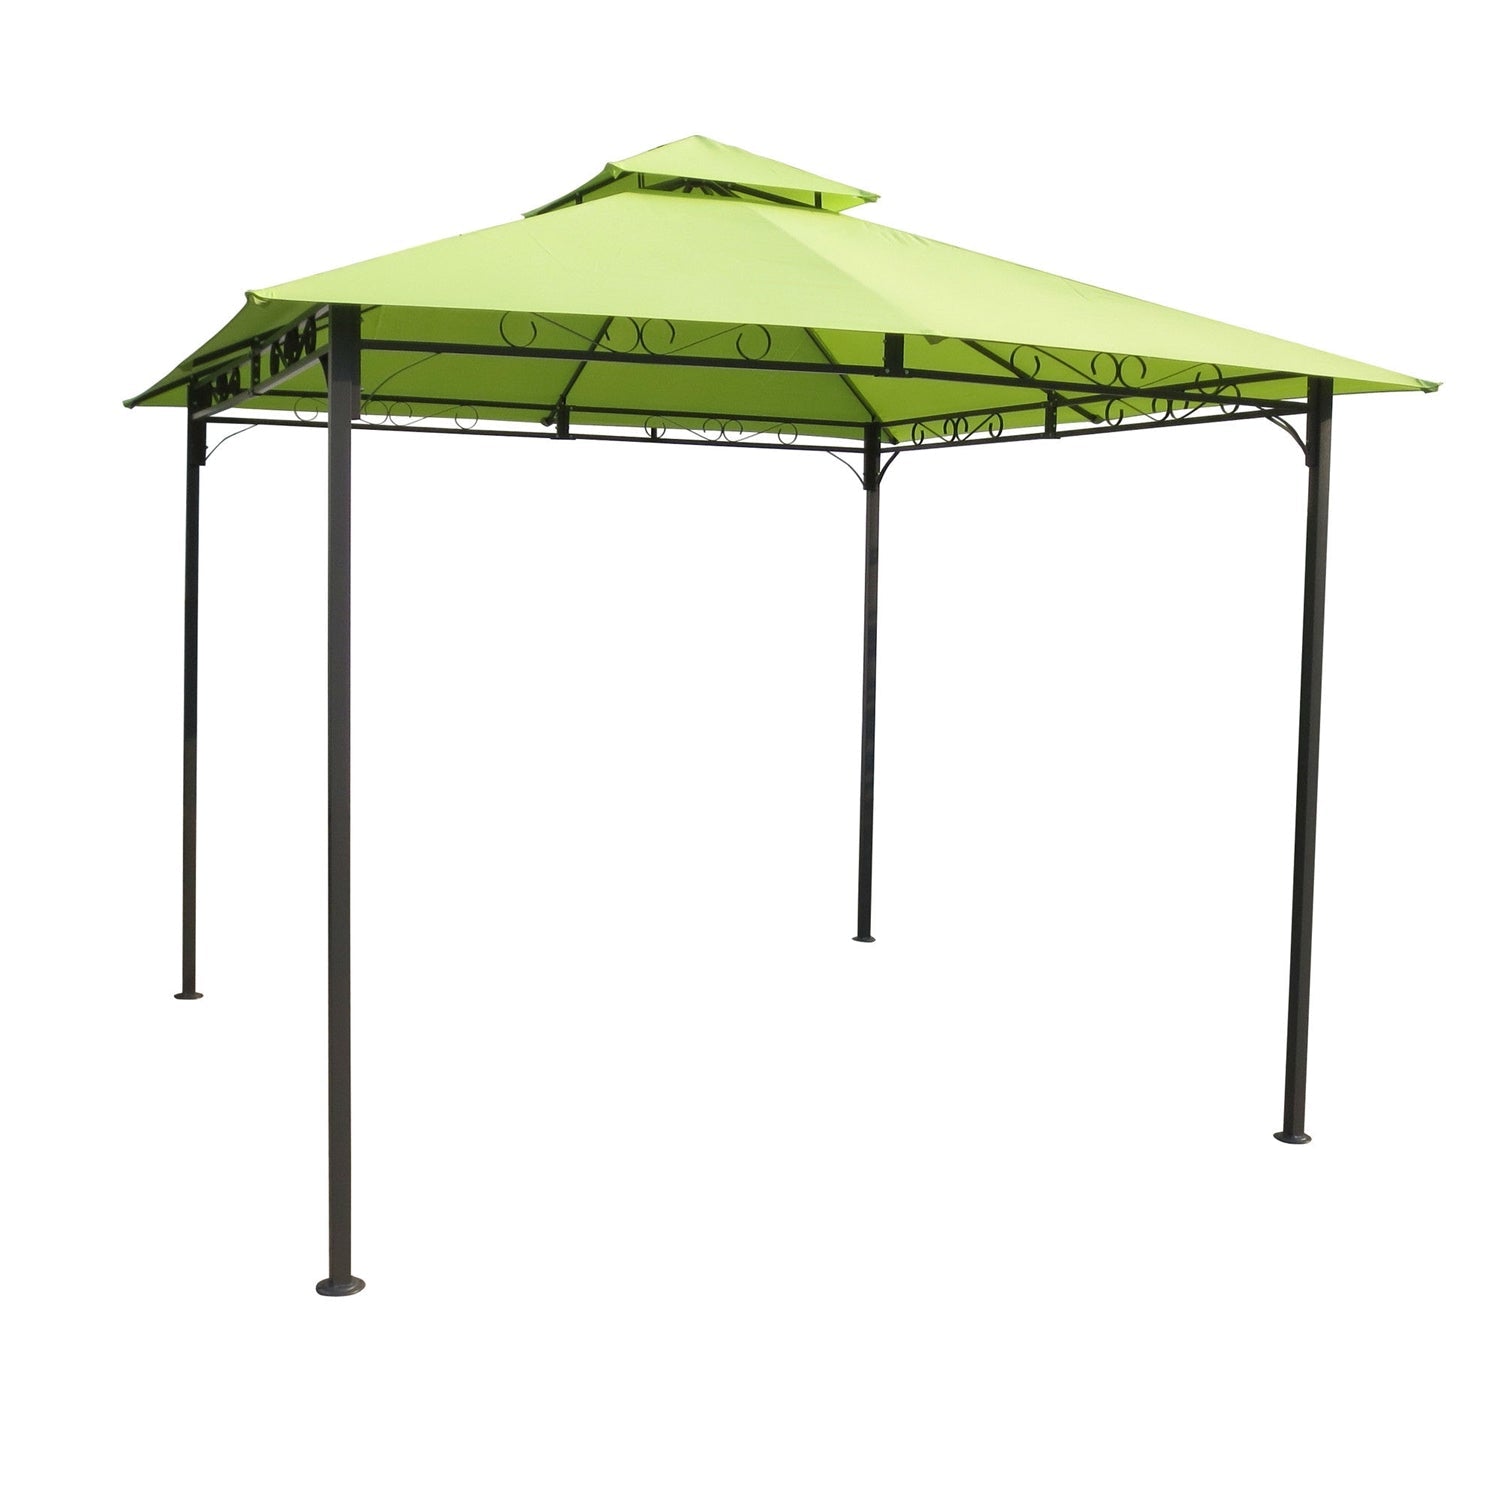 Outdoor > Gazebos & Canopies - 10Ft X 10Ft Weather Resistant Gazebo With Lime Green Canopy